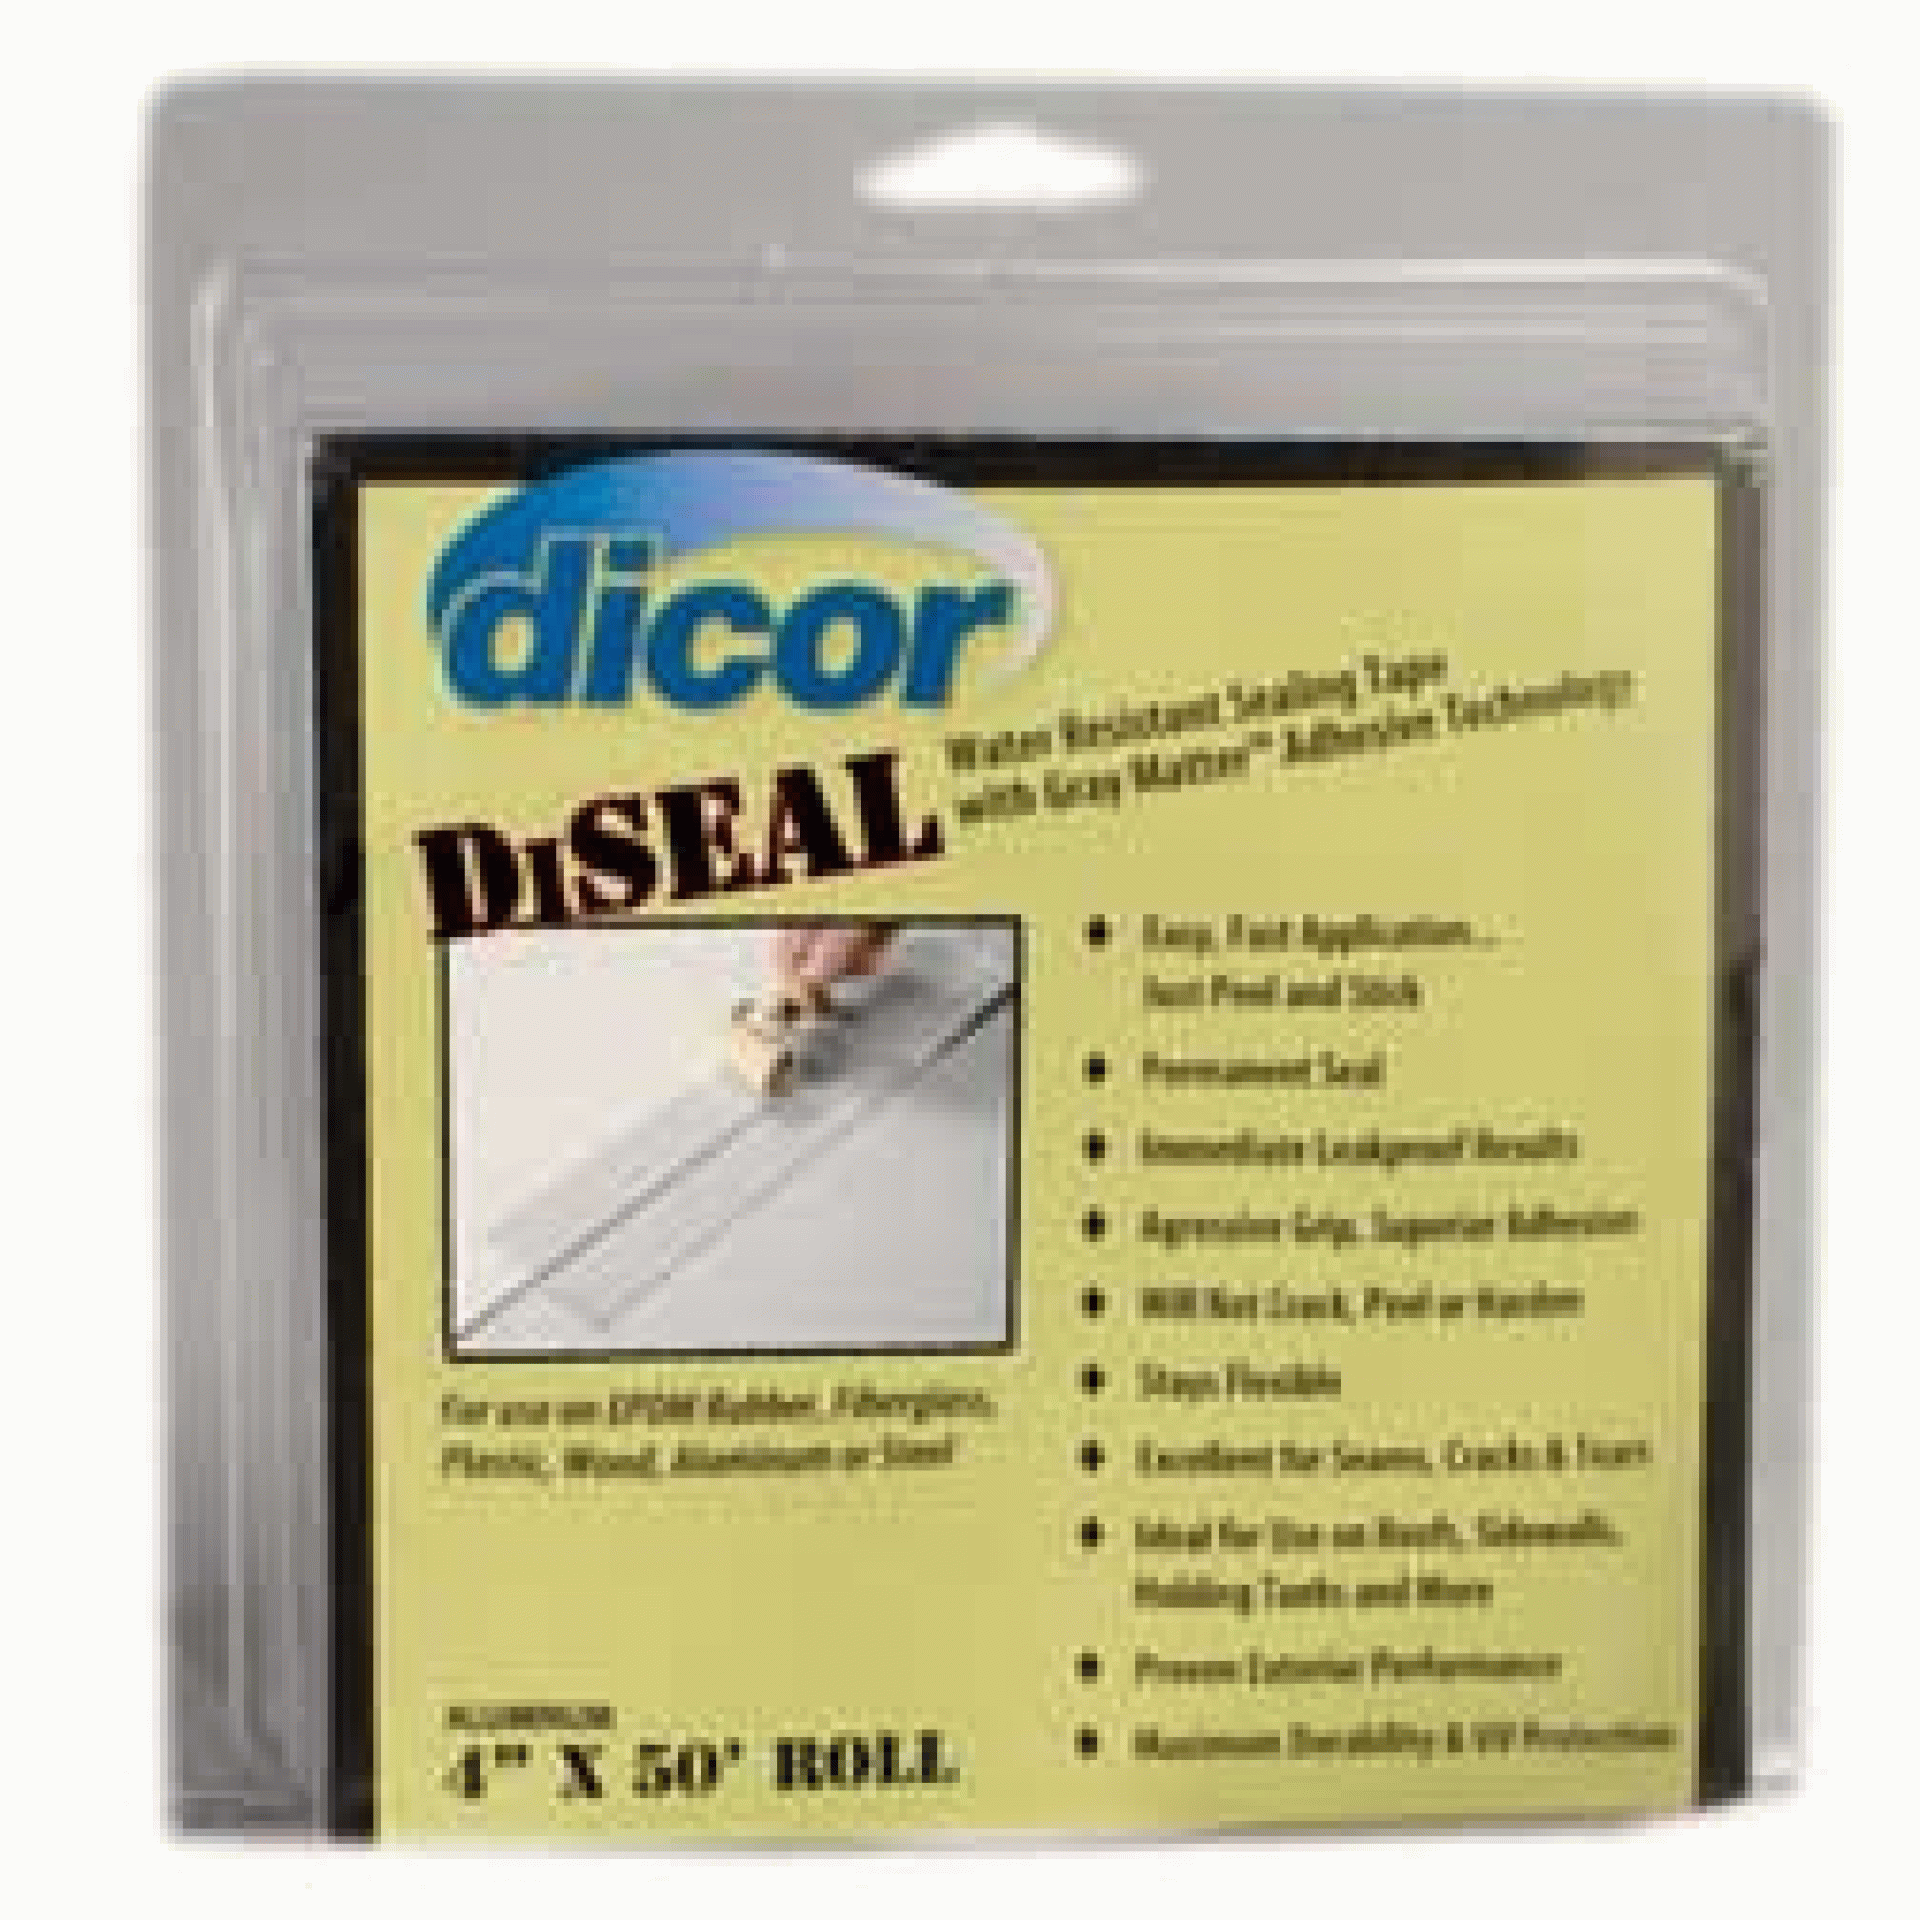 DICOR CORP. | 522AF-450-1C | TAPE SEALING DISEAL FOIL 4" x 50' ROLL